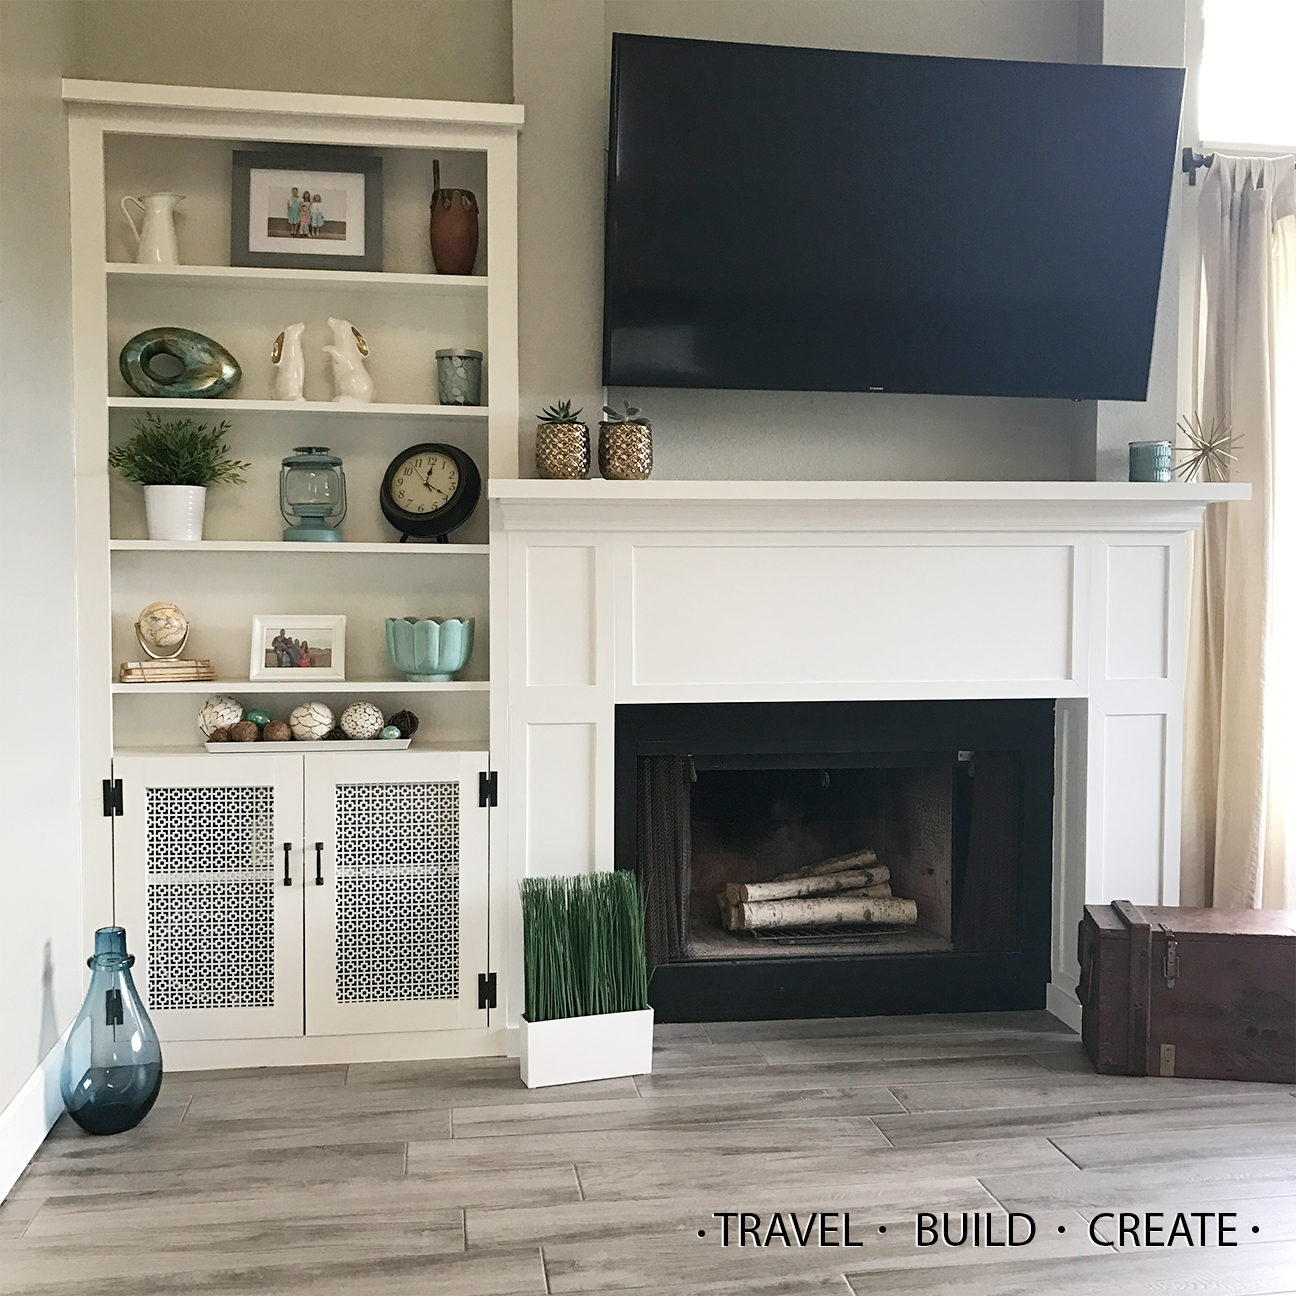 Diy Fireplace Surround And Built In Bookshelves - Diy Built In Bookshelves Around Fireplace